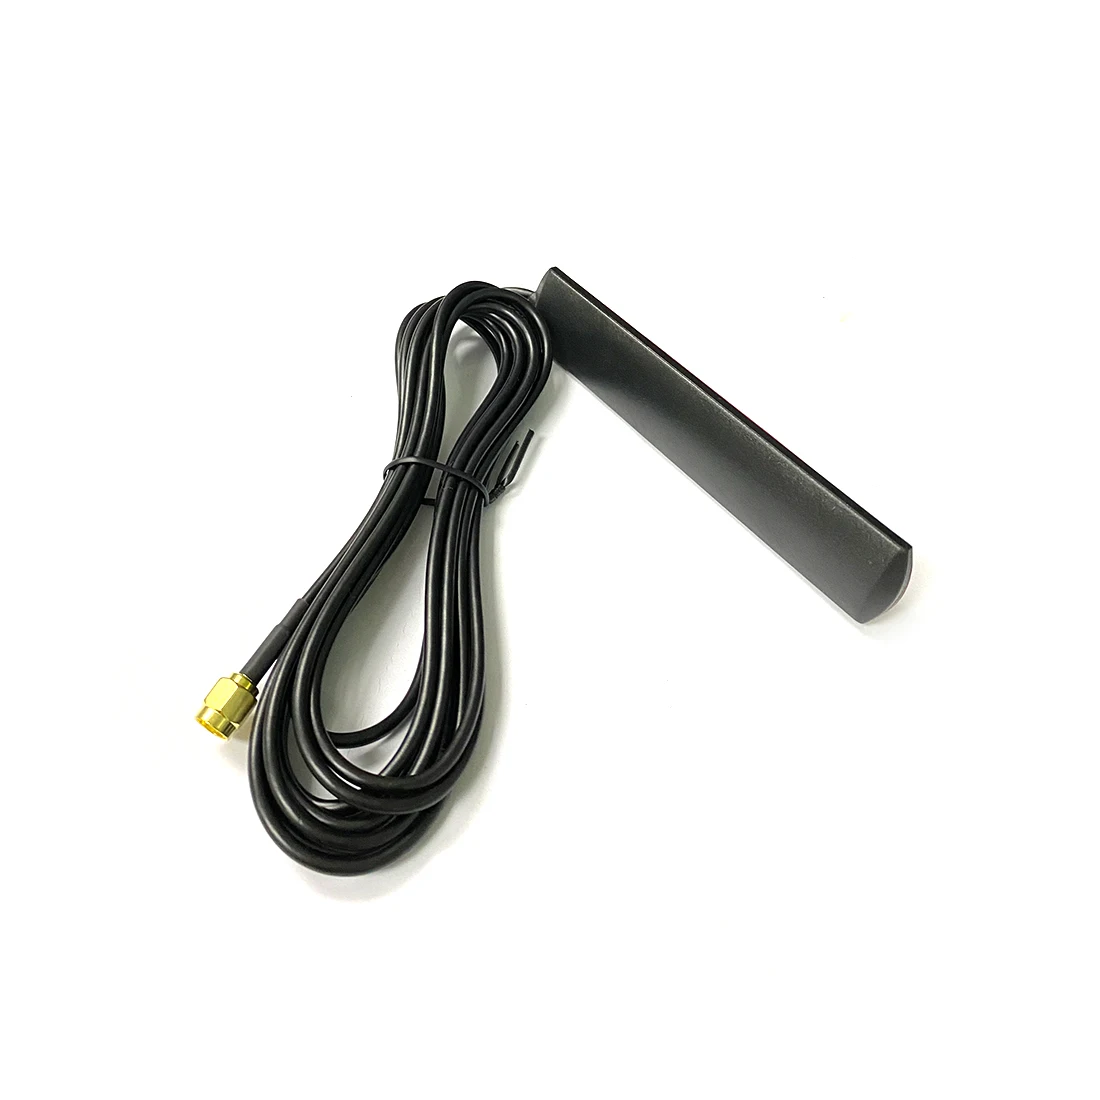 

433Mhz 2.15DBi Patch Antenna SMA Male Connector With Extension RG174 Cable 3meters Radio Aerial Wholesale